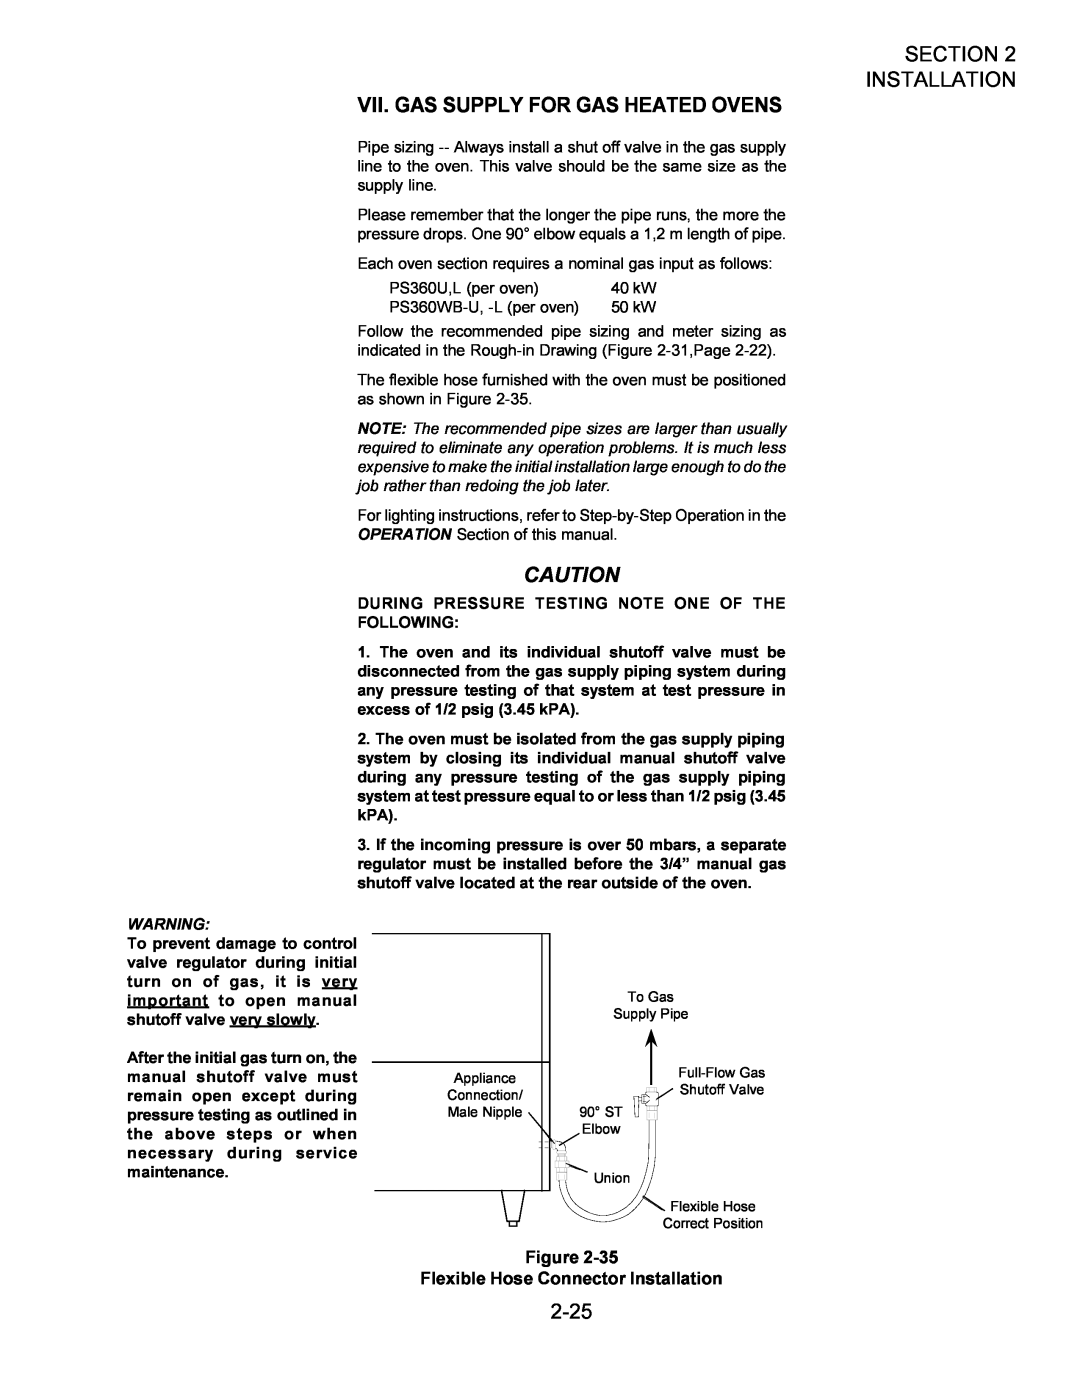 Middleby Marshall owner manual Vii. Gas Supply For Gas Heated Ovens, 2-25, Flexible Hose Connector Installation 